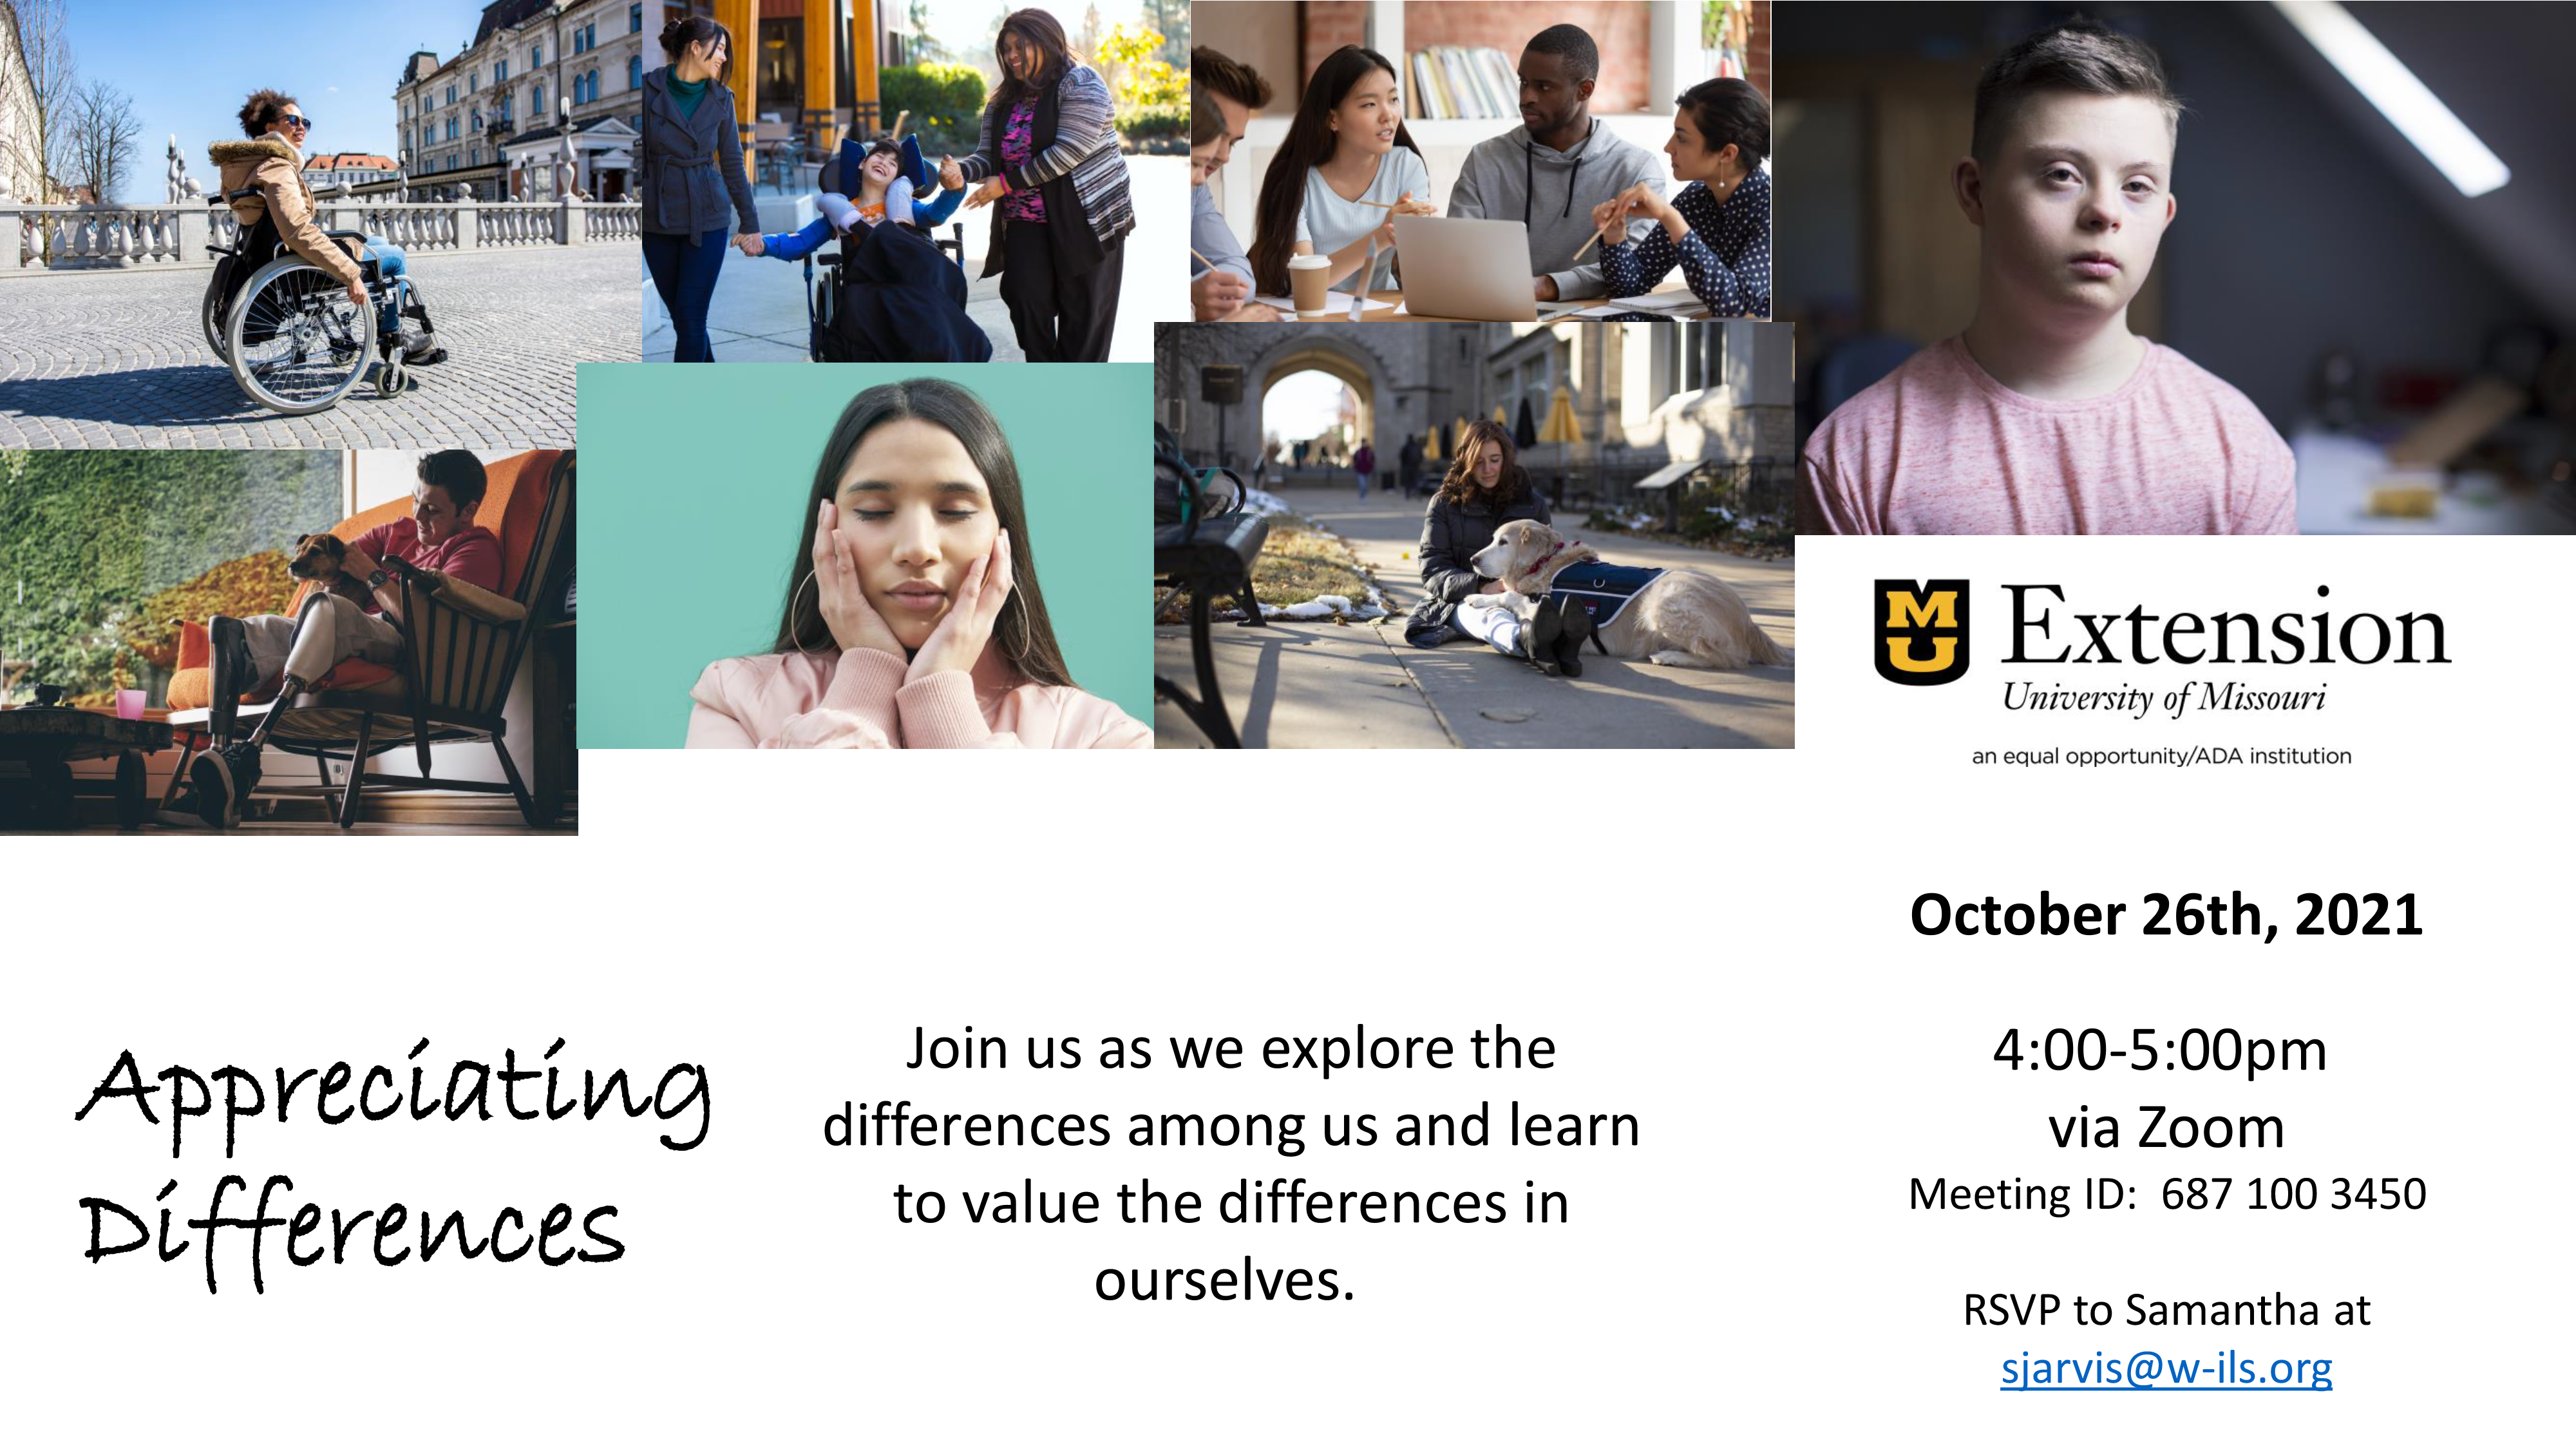 Appreciating Differences. October 26th, 2021 4:00 5:00pm via Zoom M eeting ID: 687 100 3450 RSVP to Samantha at sjarvis@w ils.org Join us as we explore the differences among us and learn to value the differences in ourselves.